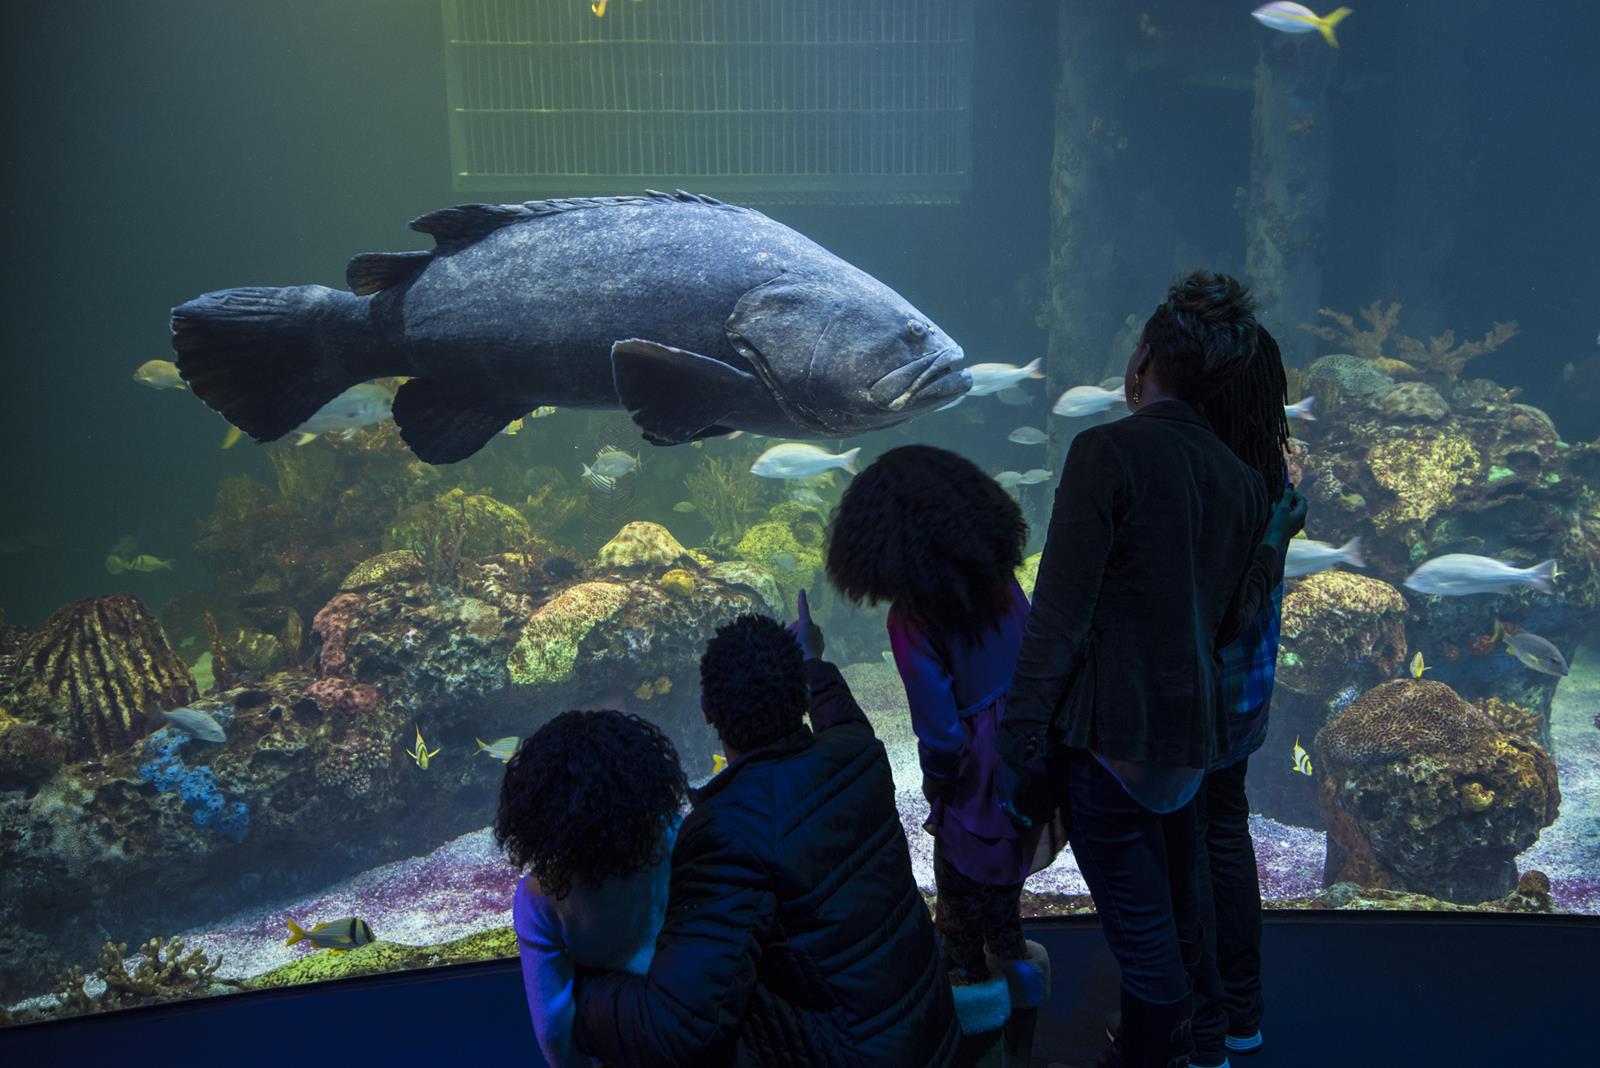 Springfield, Missouri is home to the top-rated aquarium in the United States